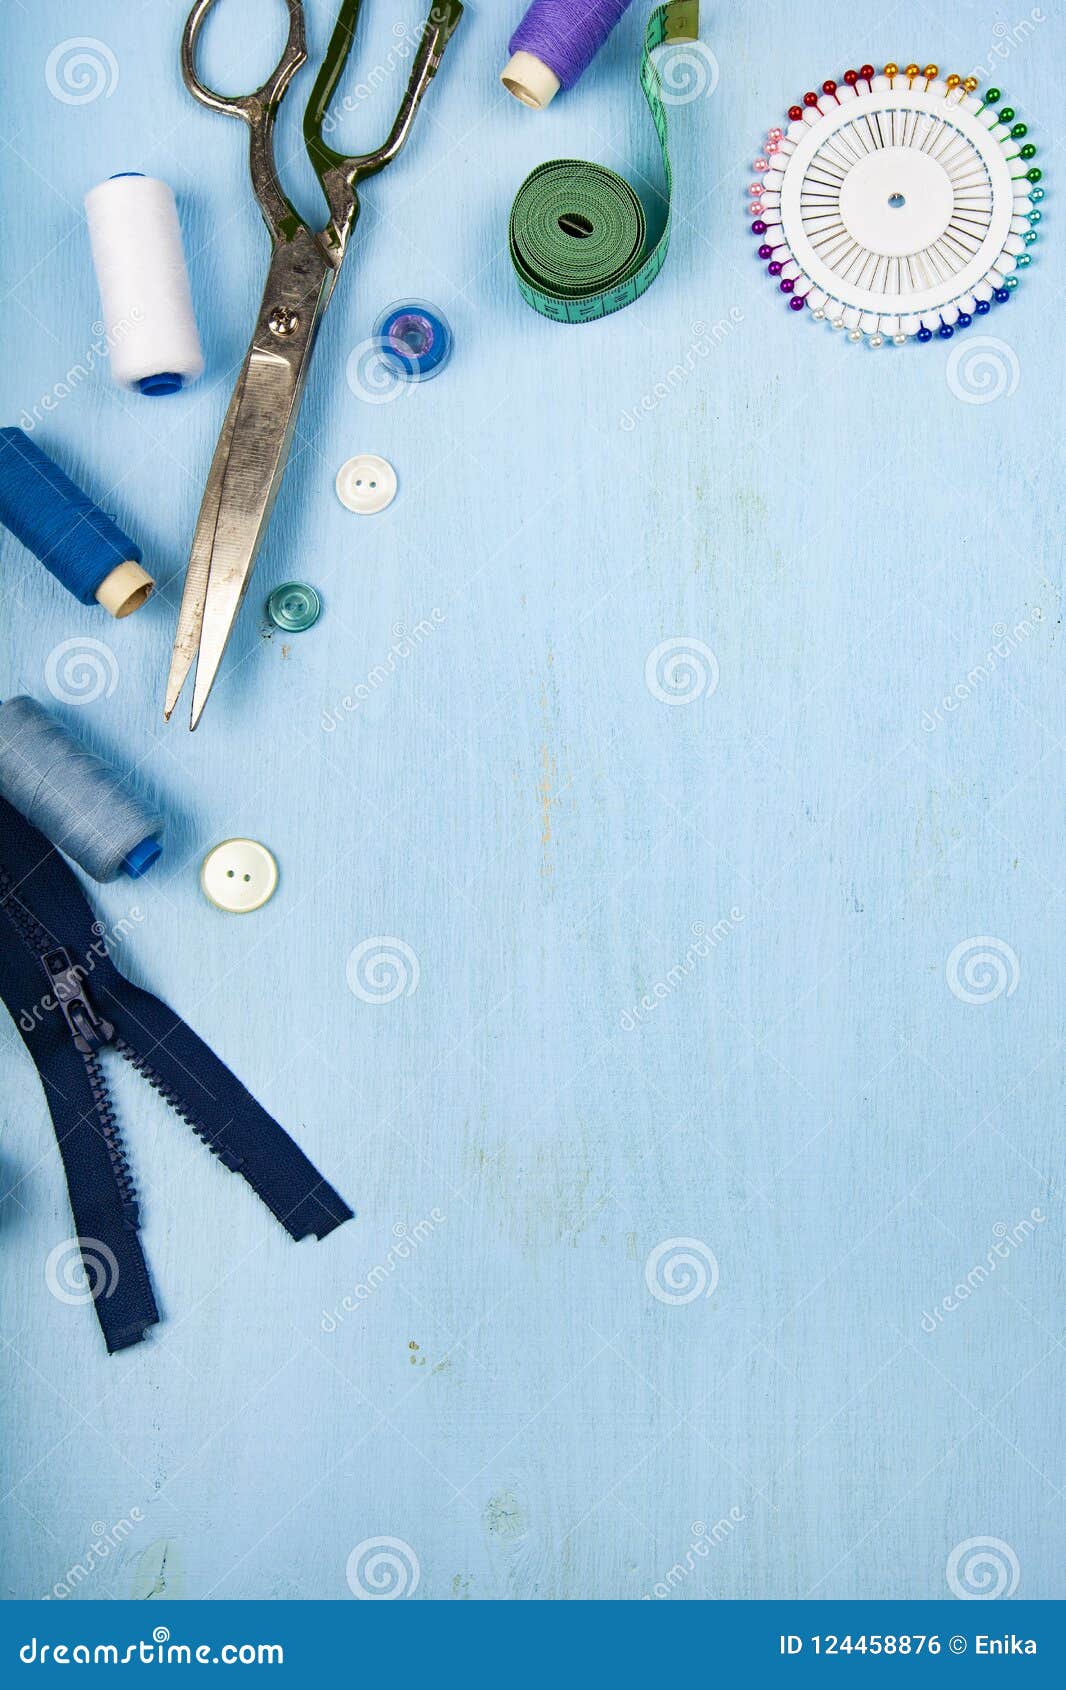 Sewing Accessories on a Blue Background Stock Photo - Image of buttons ...